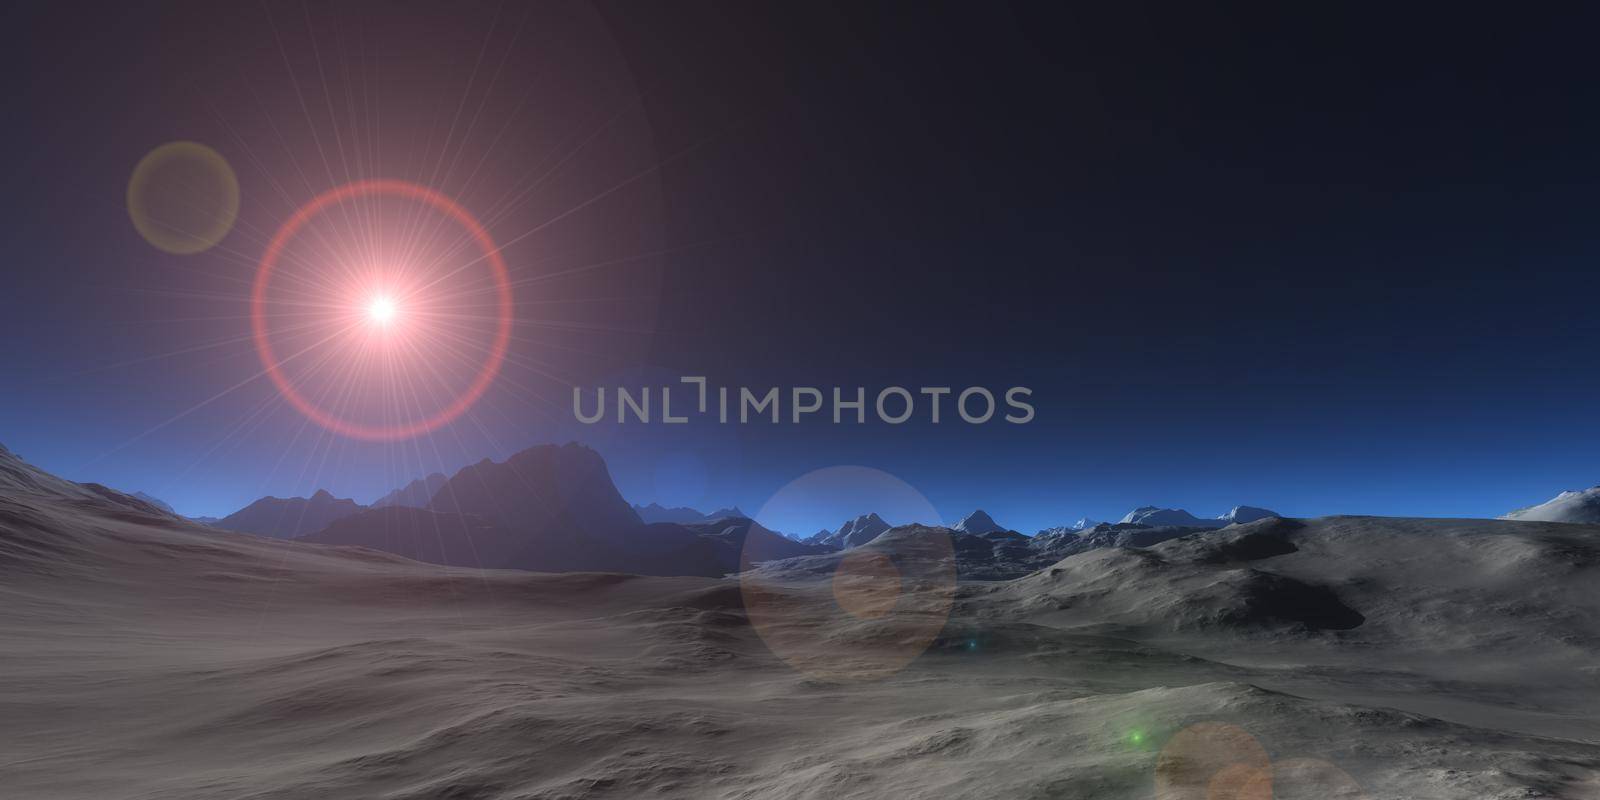 mountain plateau abstract landscape panorama, 3d render illustration